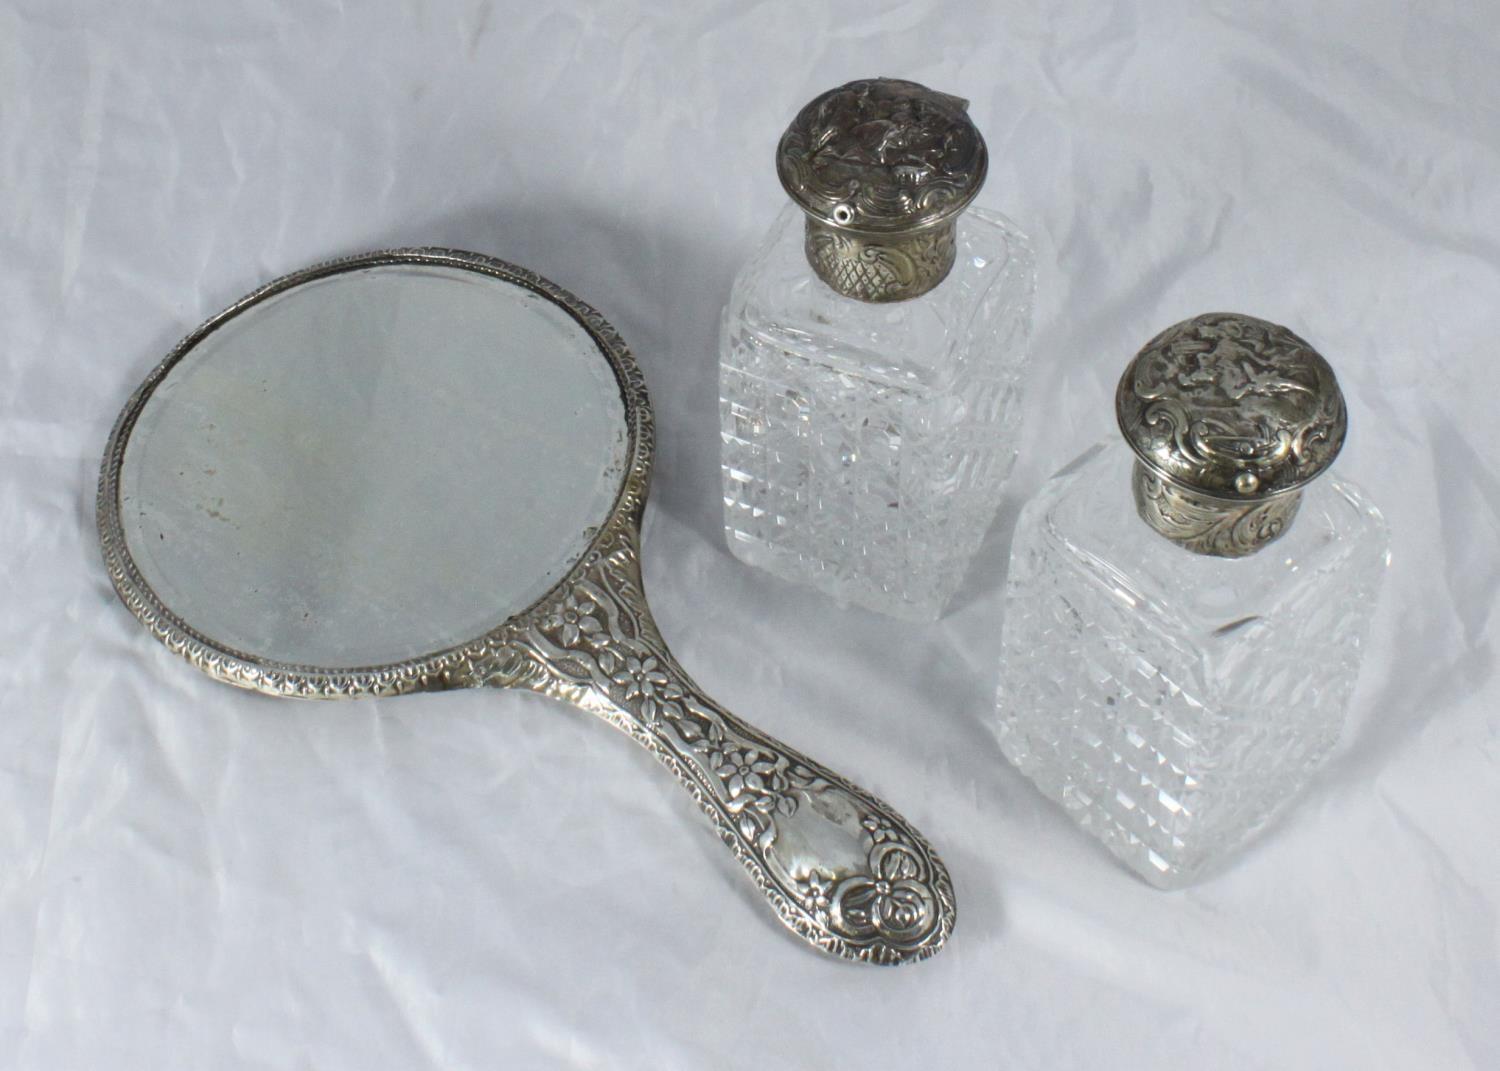 A silver-backed mirror engraved with ornate floral decoration, Chester, 1909, stamped WJM & Co,